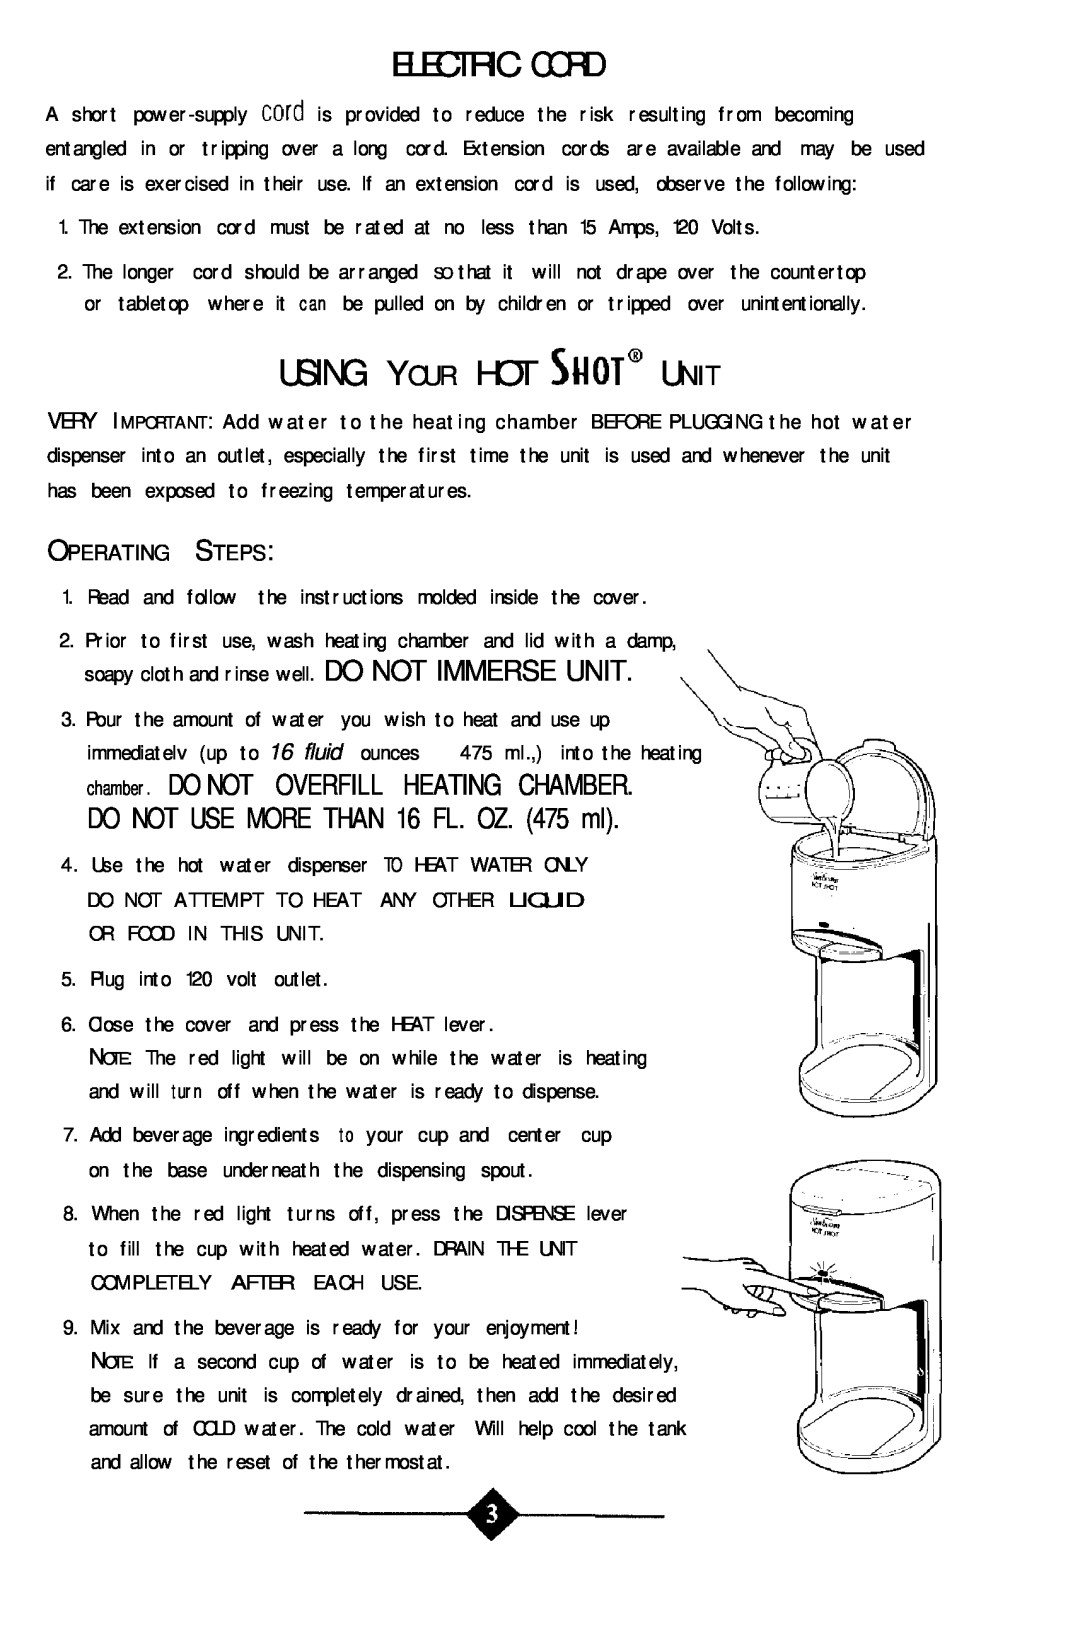 Sunbeam 3211 instruction manual Electric Cord, Using Your Hot Shot@ Unit, chamber. DO NOT OVERFILL HEATING CHAMBER 